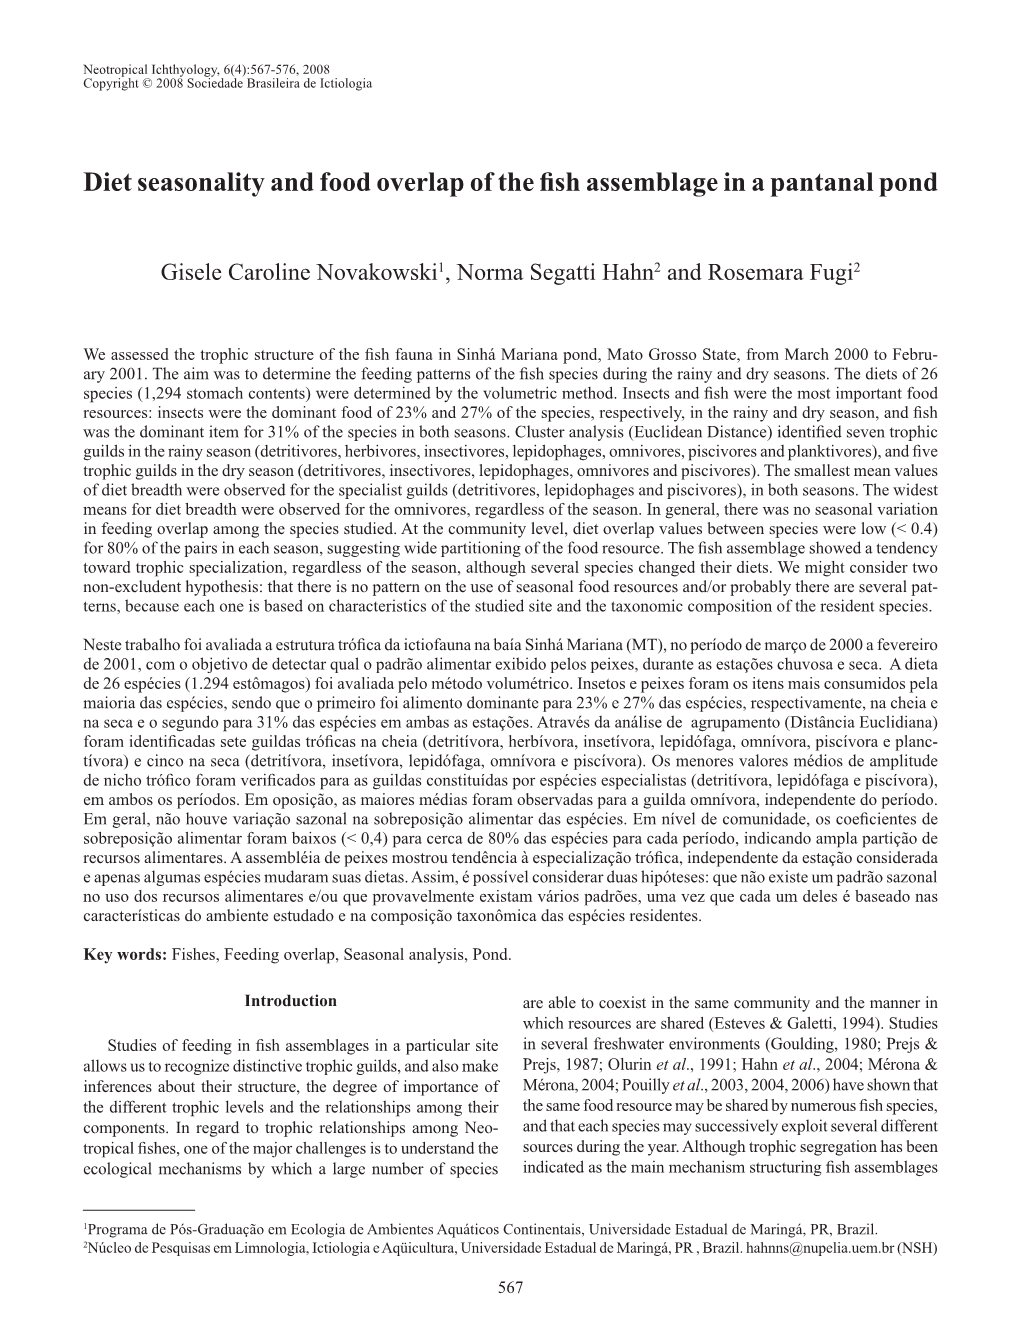 Diet Seasonality and Food Overlap of the Fish Assemblage in a Pantanal Pond